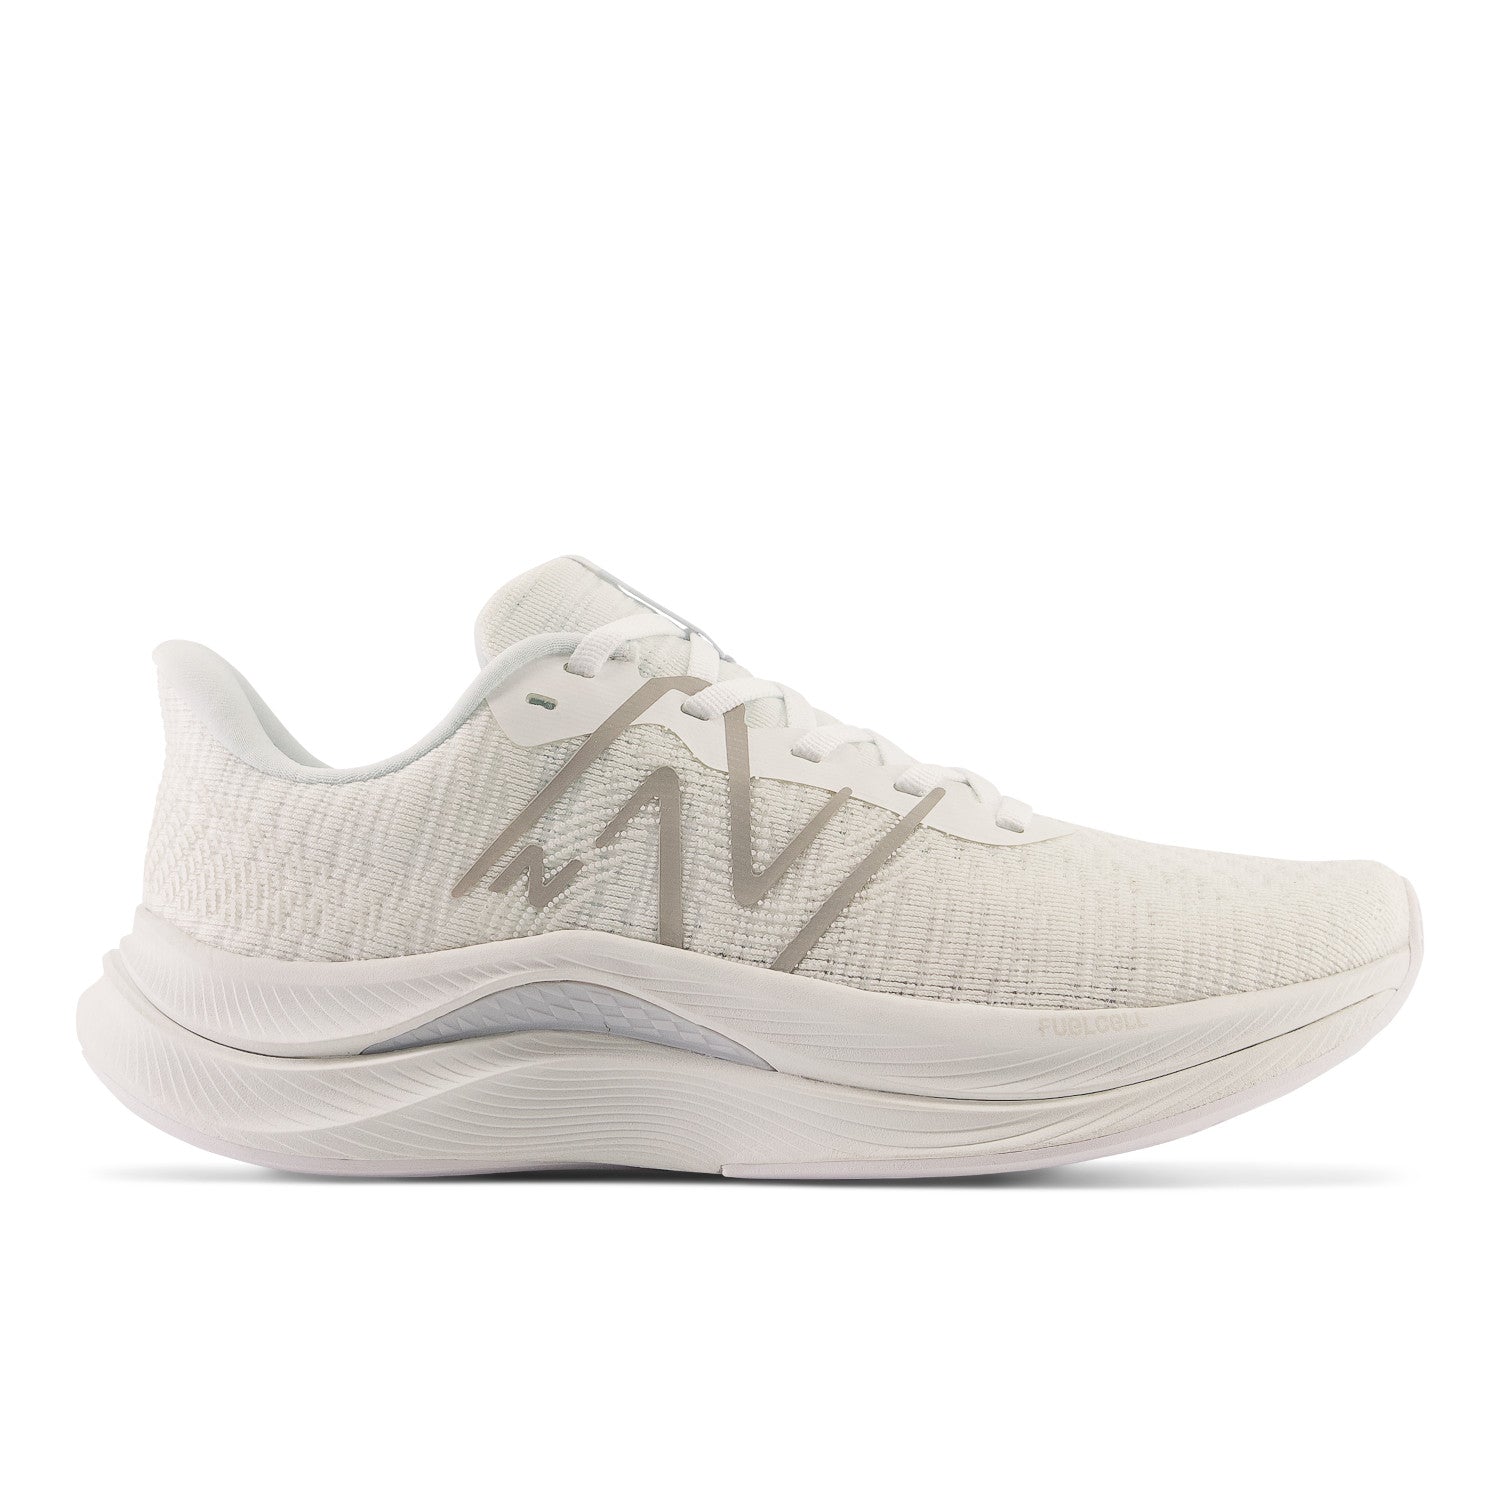 New Balance FuelCell Propel WFCPRLW4 Women's 2